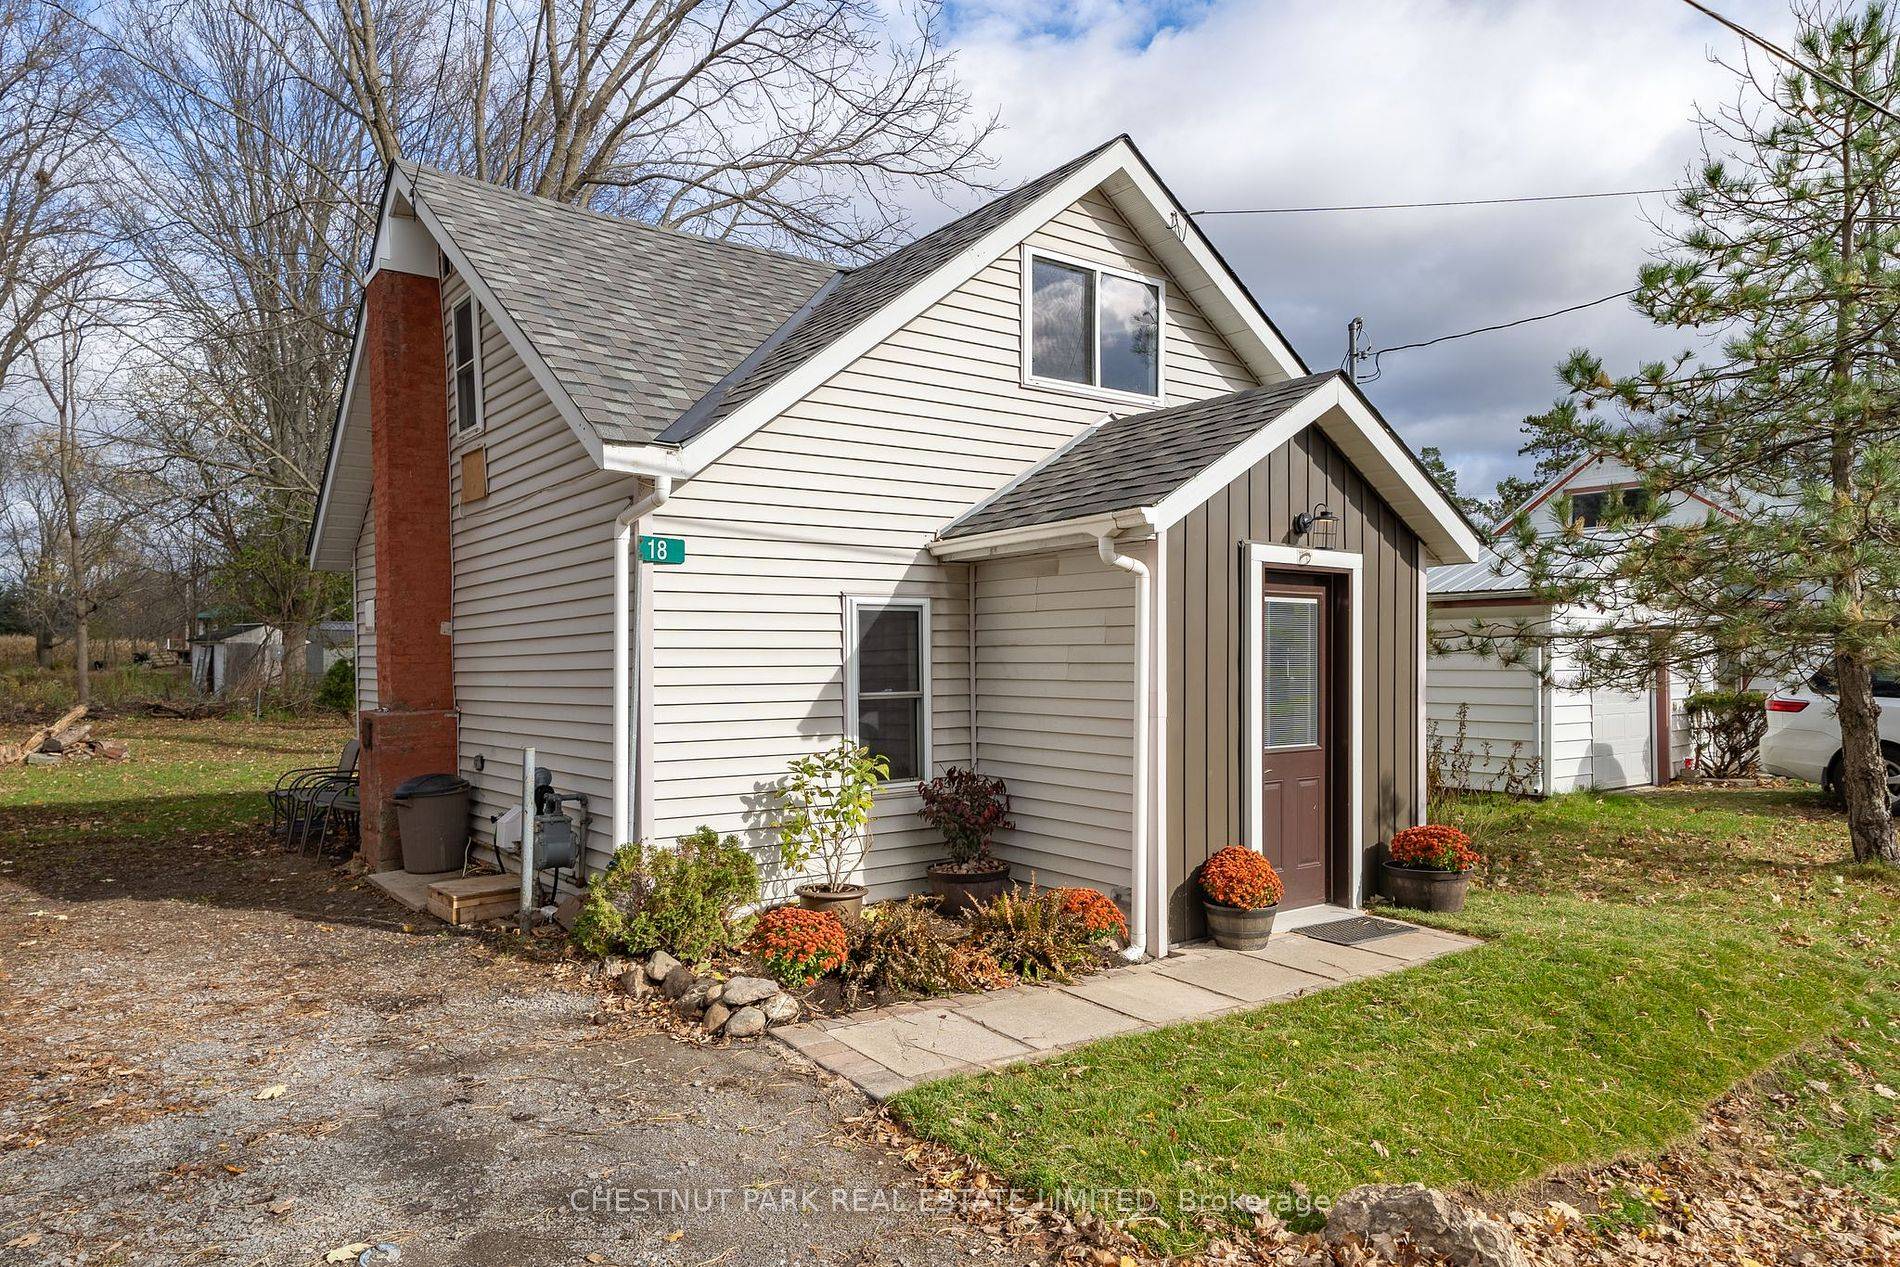 This newly renovated 1 bed, 1 bath home is situated on a spacious lot offering plenty of options potential to create your own backyard retreat.